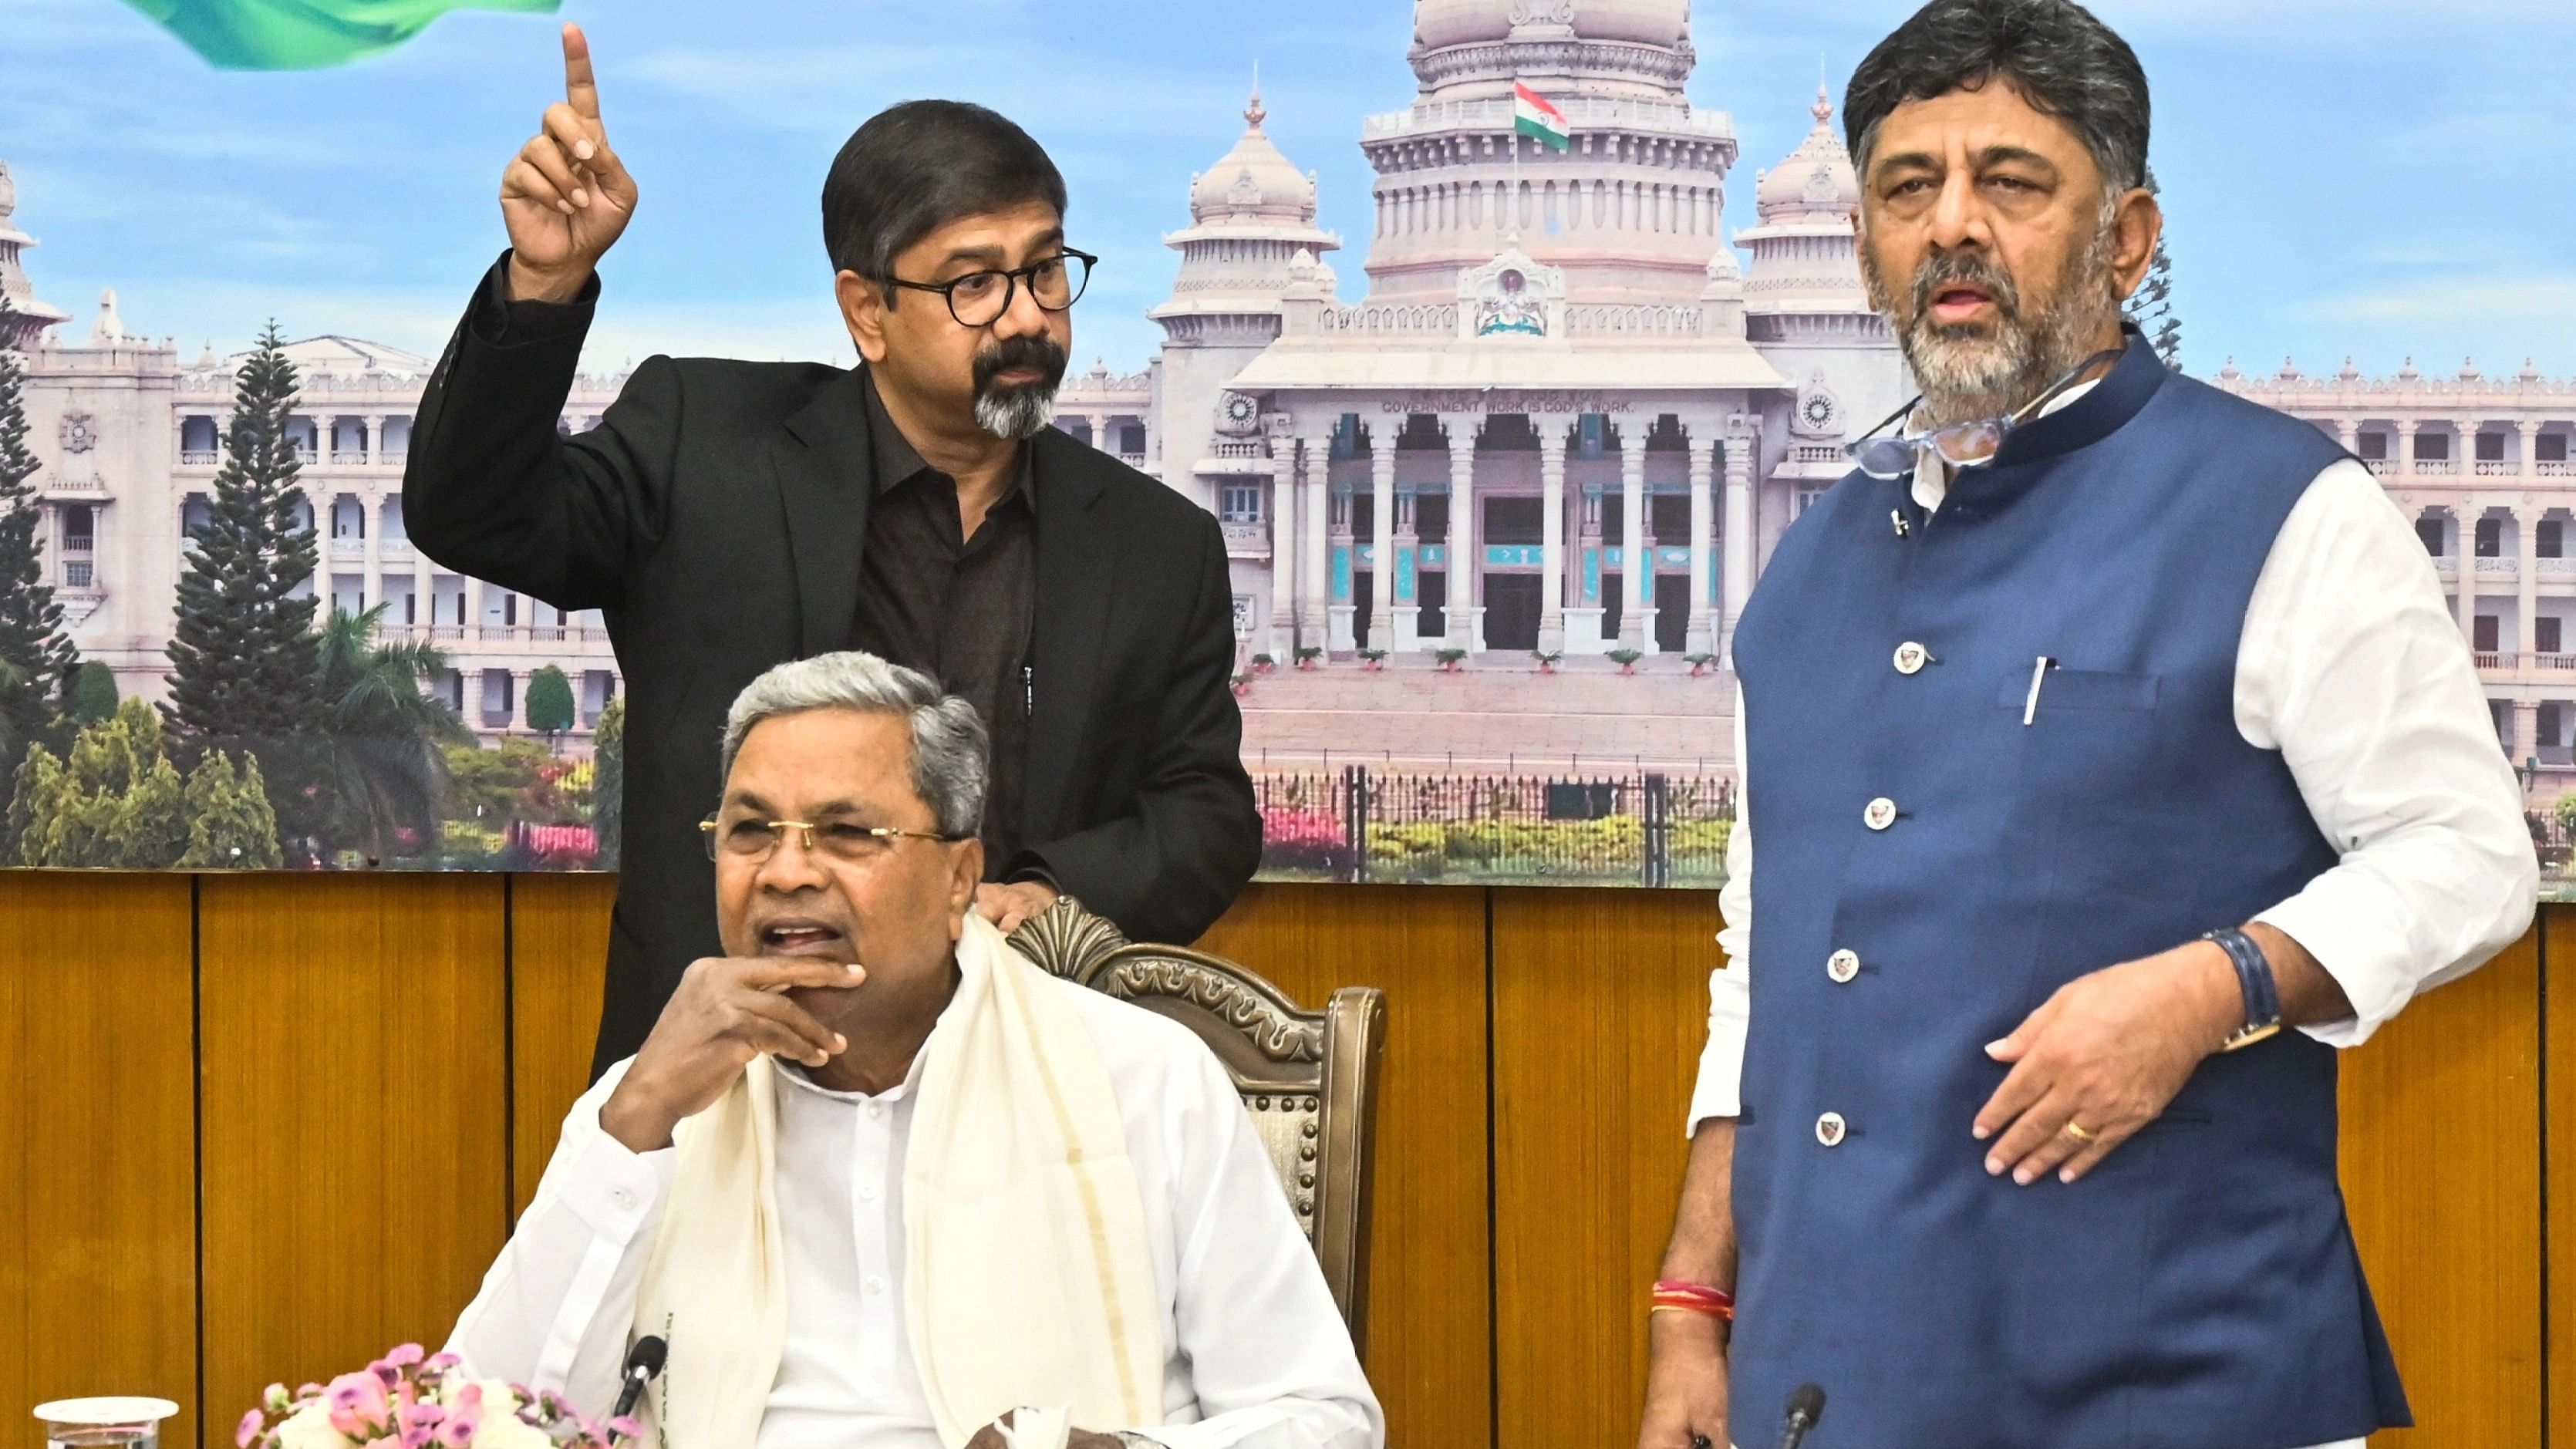 <div class="paragraphs"><p>Chief Minister M Siddaramaiah and his deputy D K Shivakumar with BMRCL boss Anjum Pervez during the virtual launch of the metro lines on Friday.&nbsp;</p></div>